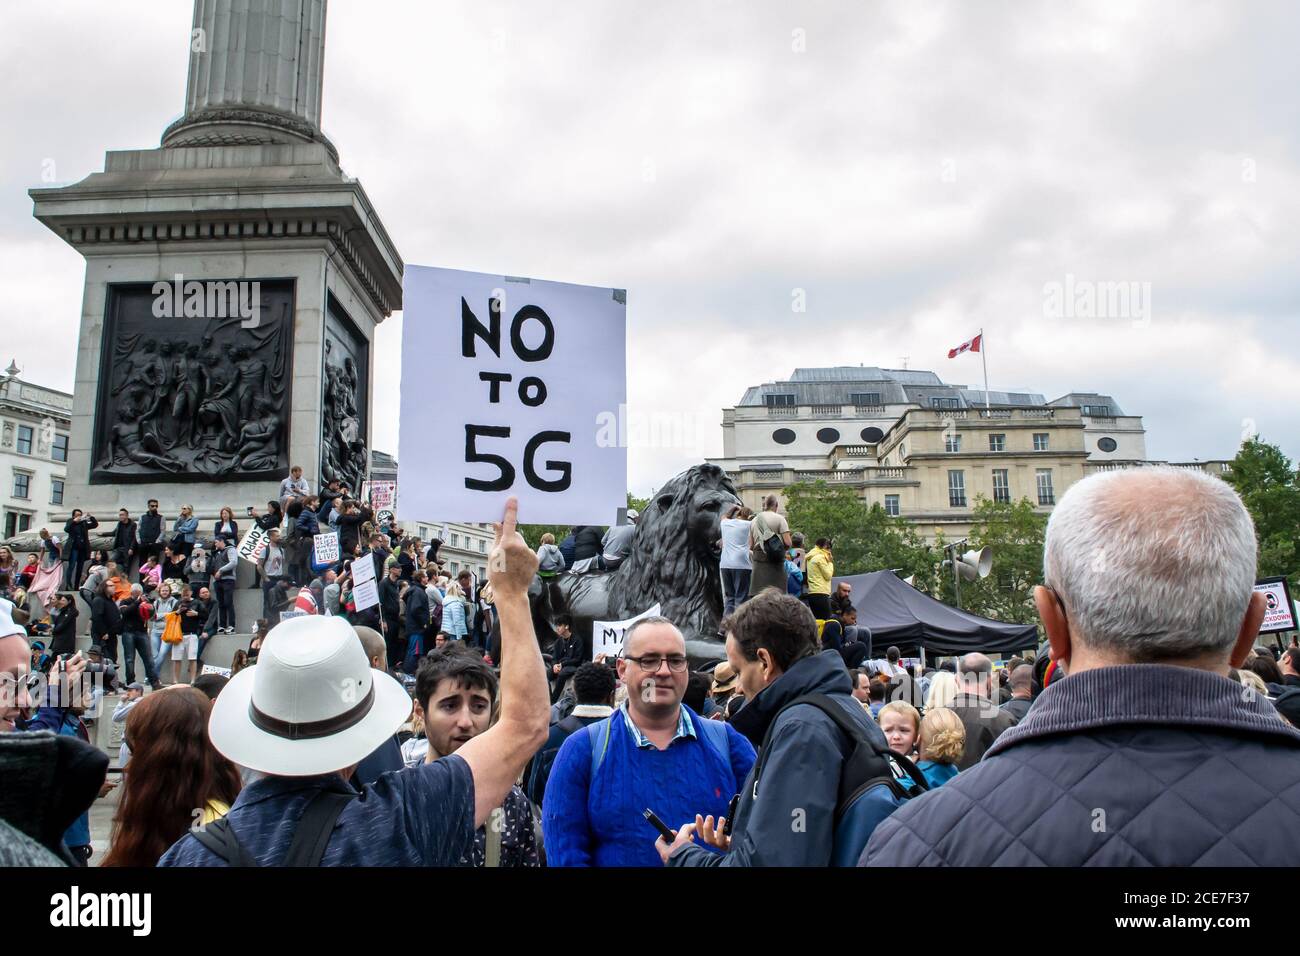 WESTMINSTER, LONDON/ENGLAND- 29 August 2020: Protester holding a 'NO TO 5G' placard at a Unite for Freedom Rally, against coronavirus restrictions Stock Photo